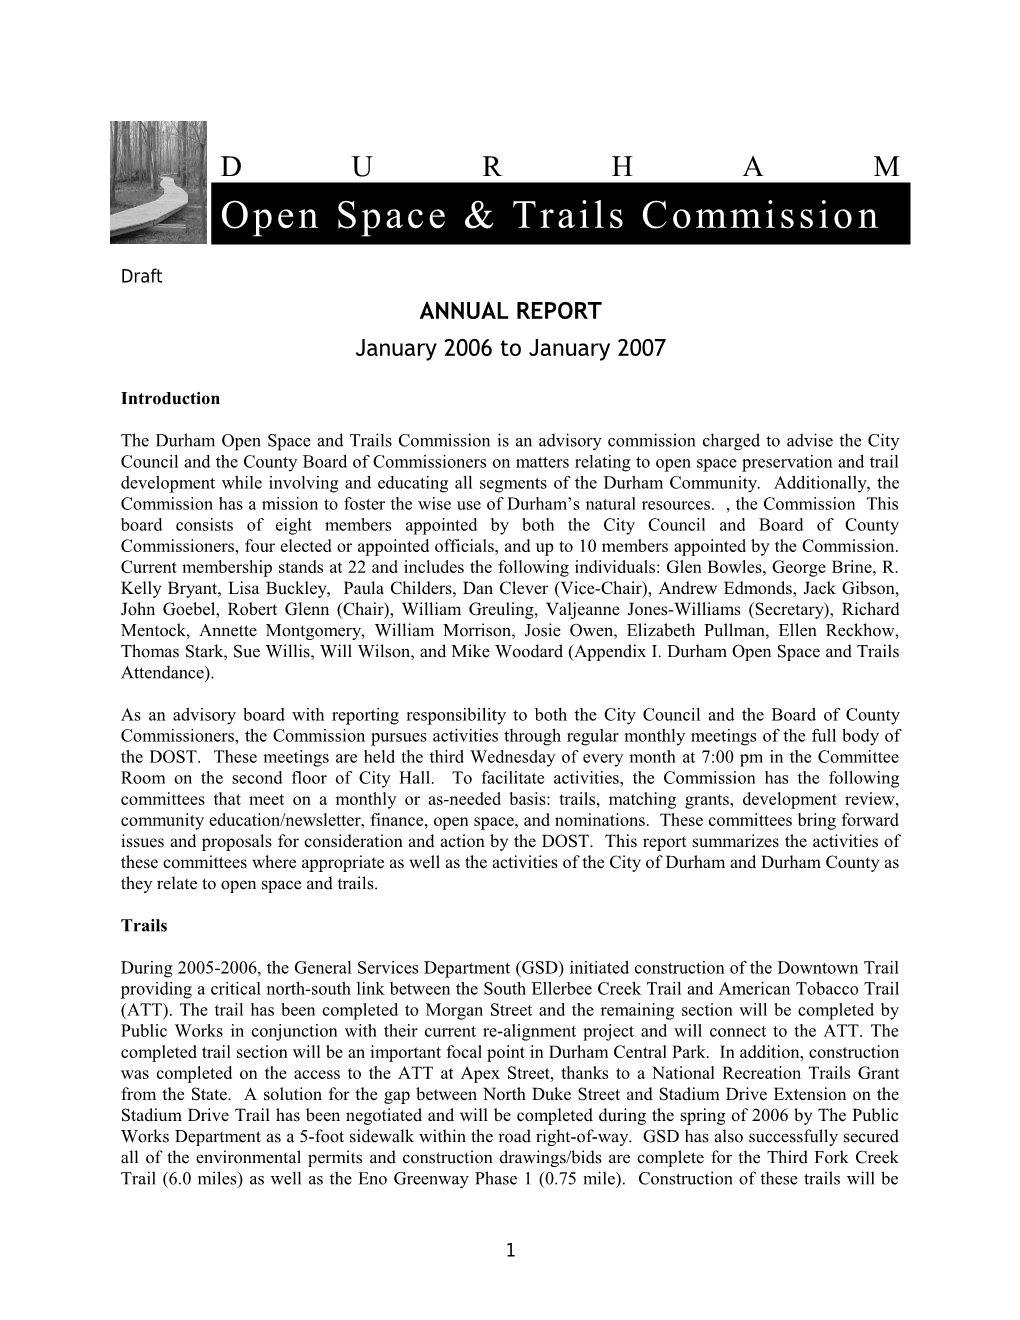 Durham Open Space and Trails Commission